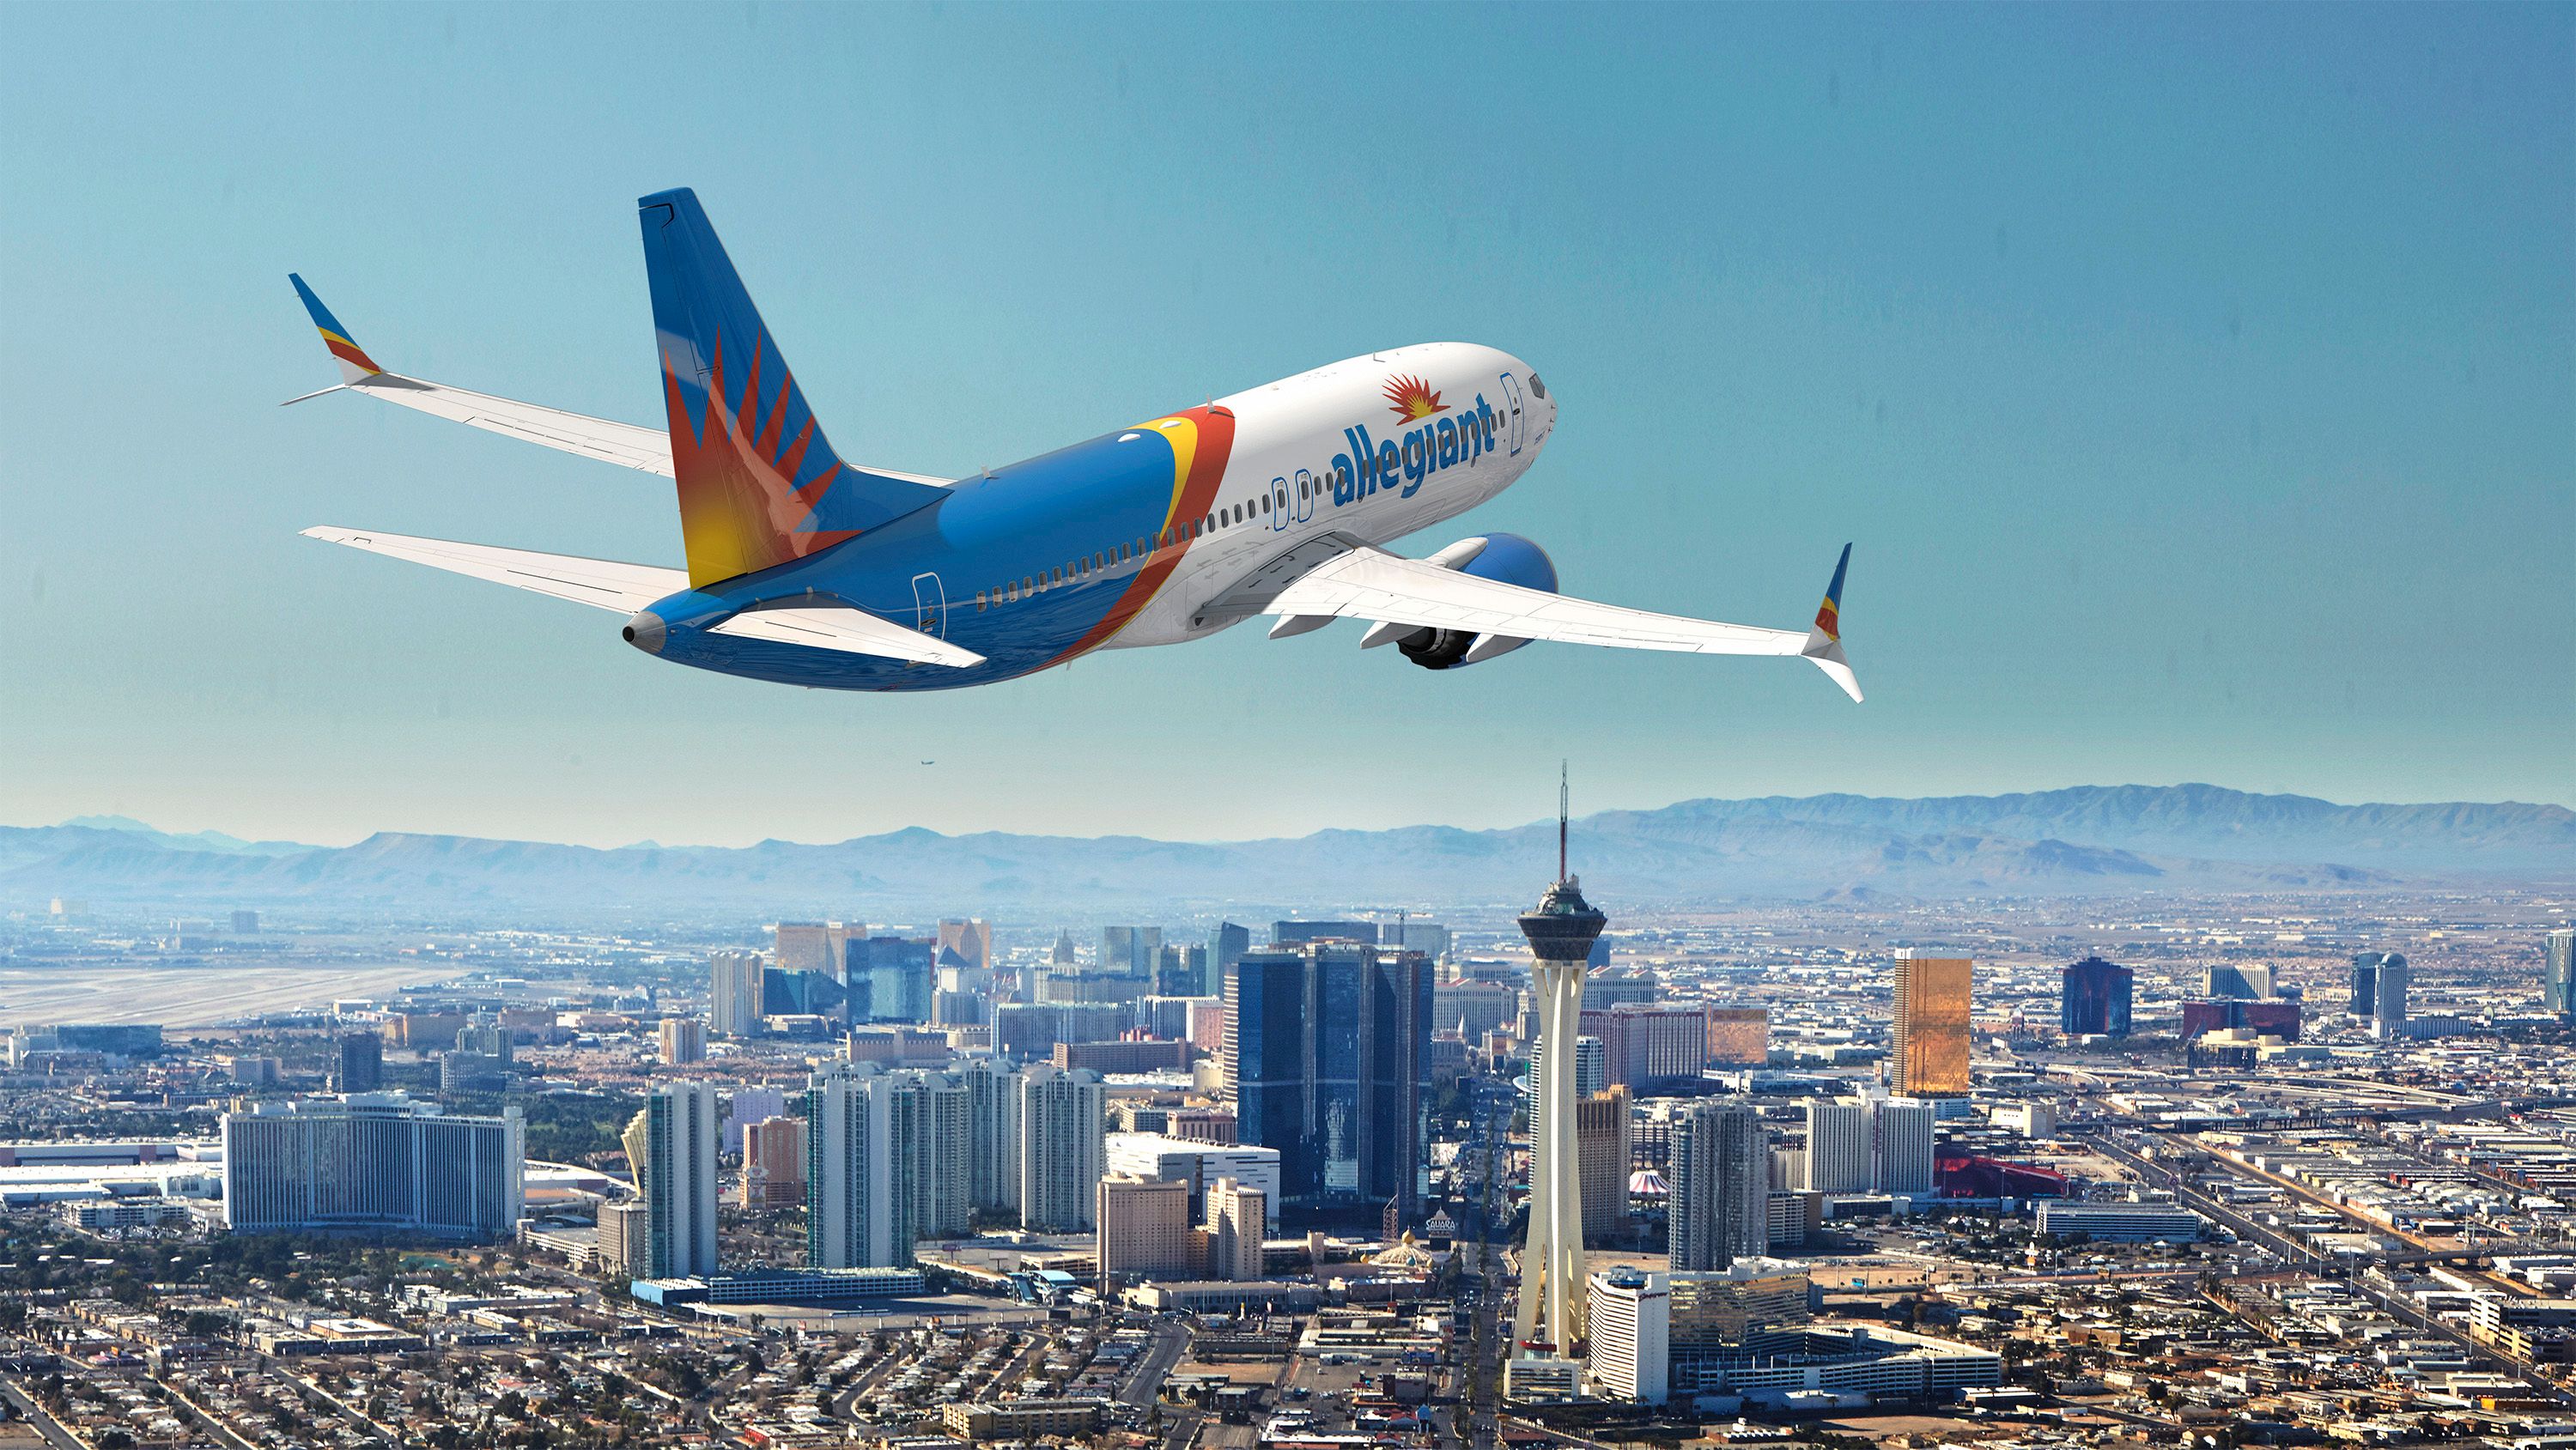 The Allegiant Air Boeing 737 MAXs are set to arrive this year